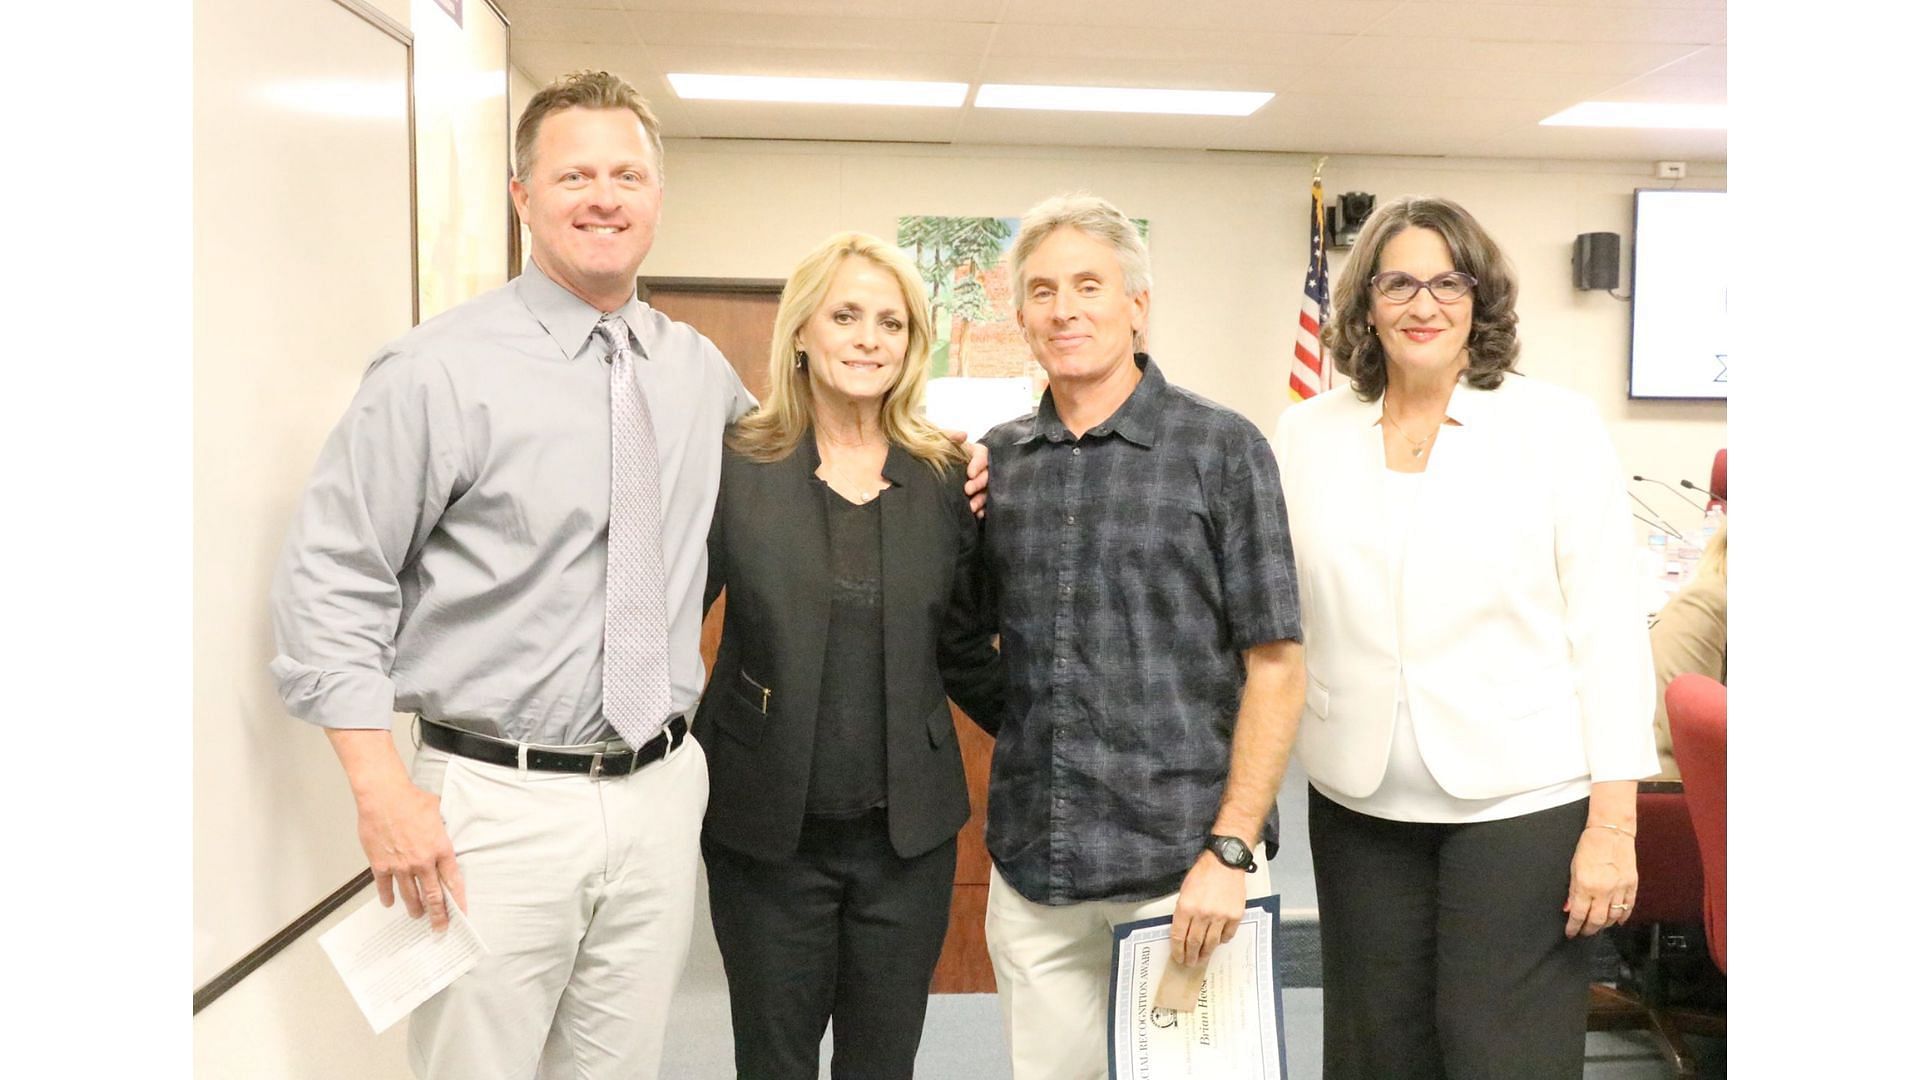 Principal Jason Manning (L) with other staff members of Modesto High (image via Facebook/Modesto City Schools)